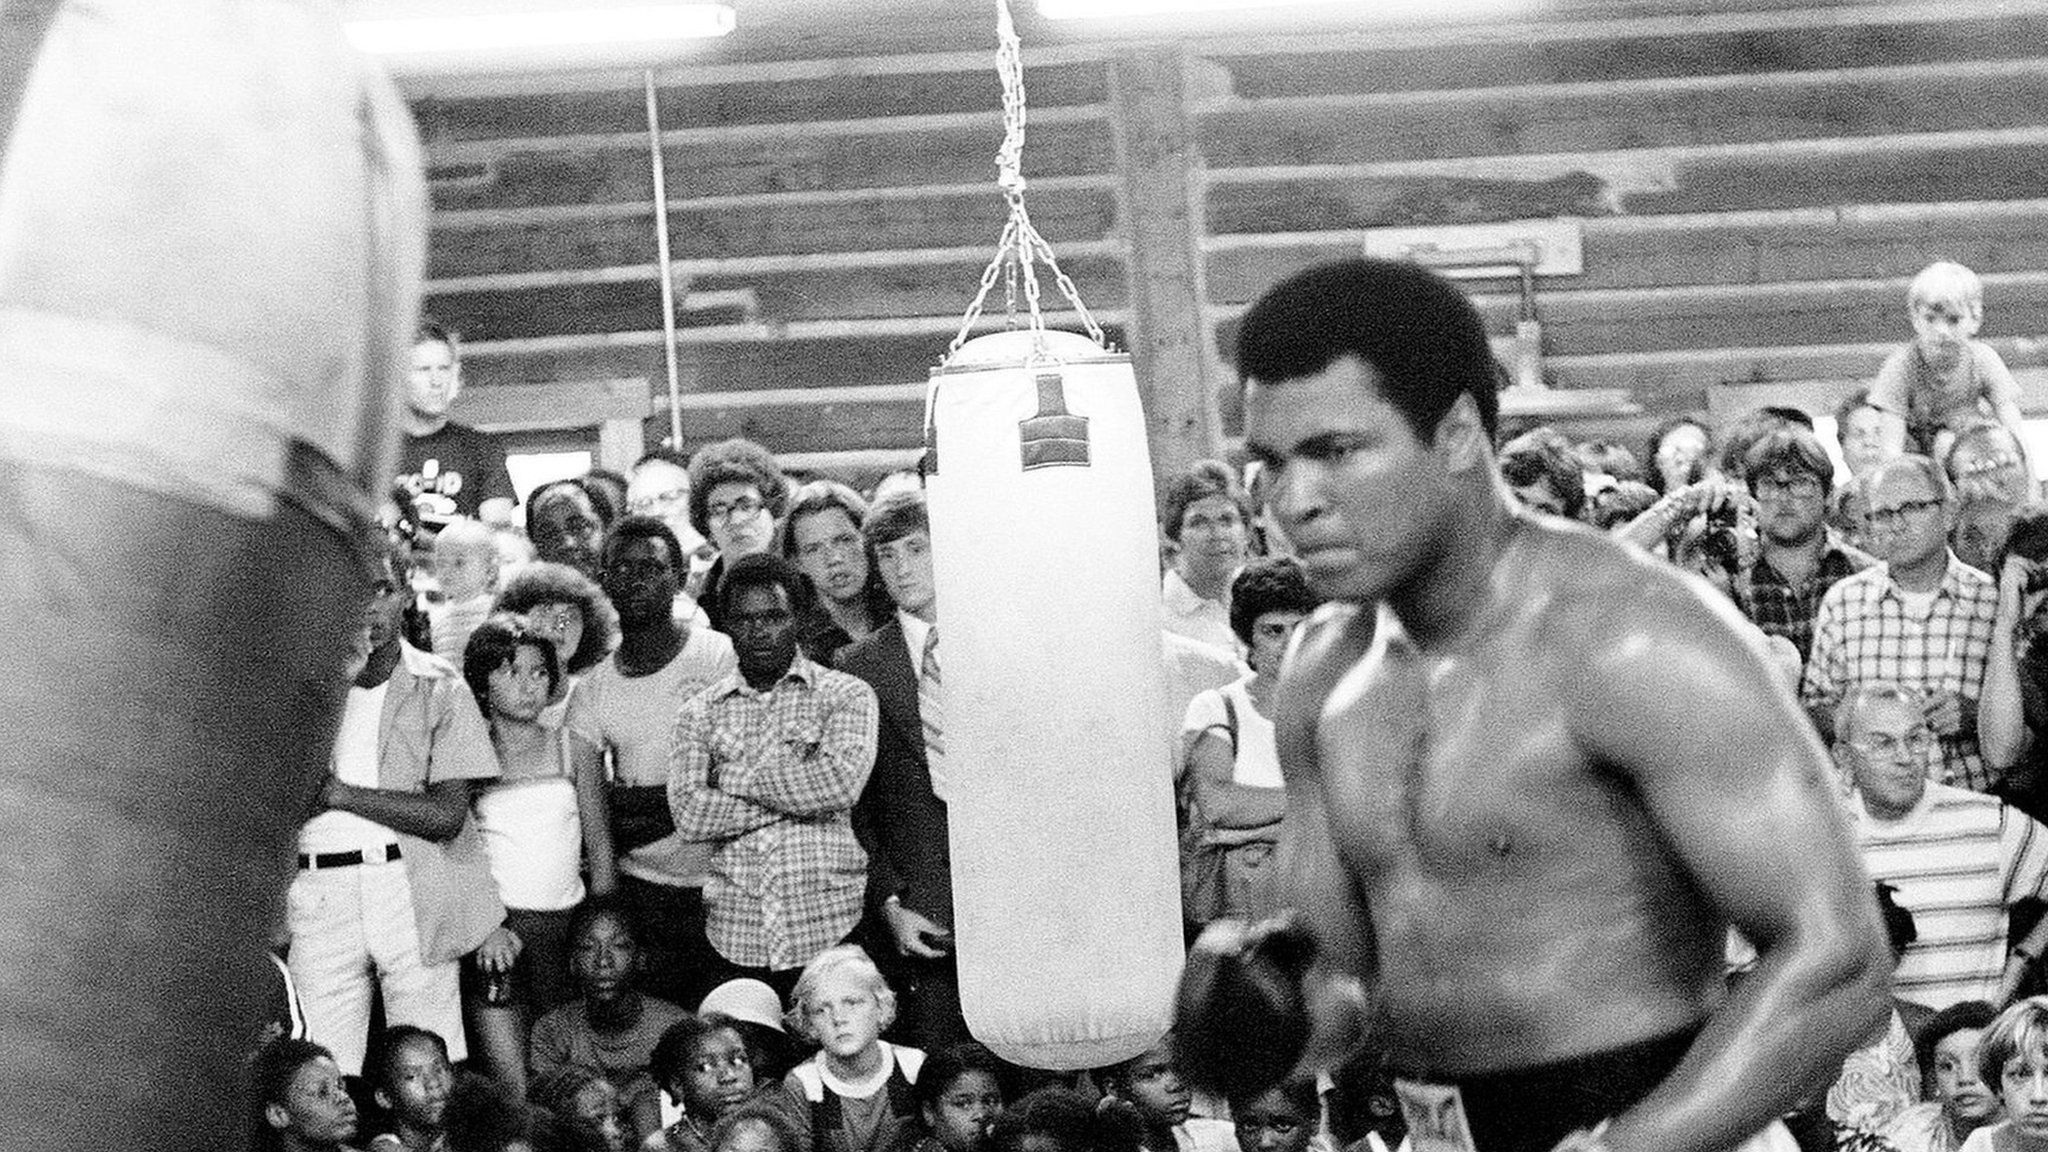 Muhammad Ali trains for second fight with Leon Spinks in New Orleans, Louisiana,August 25, 1978